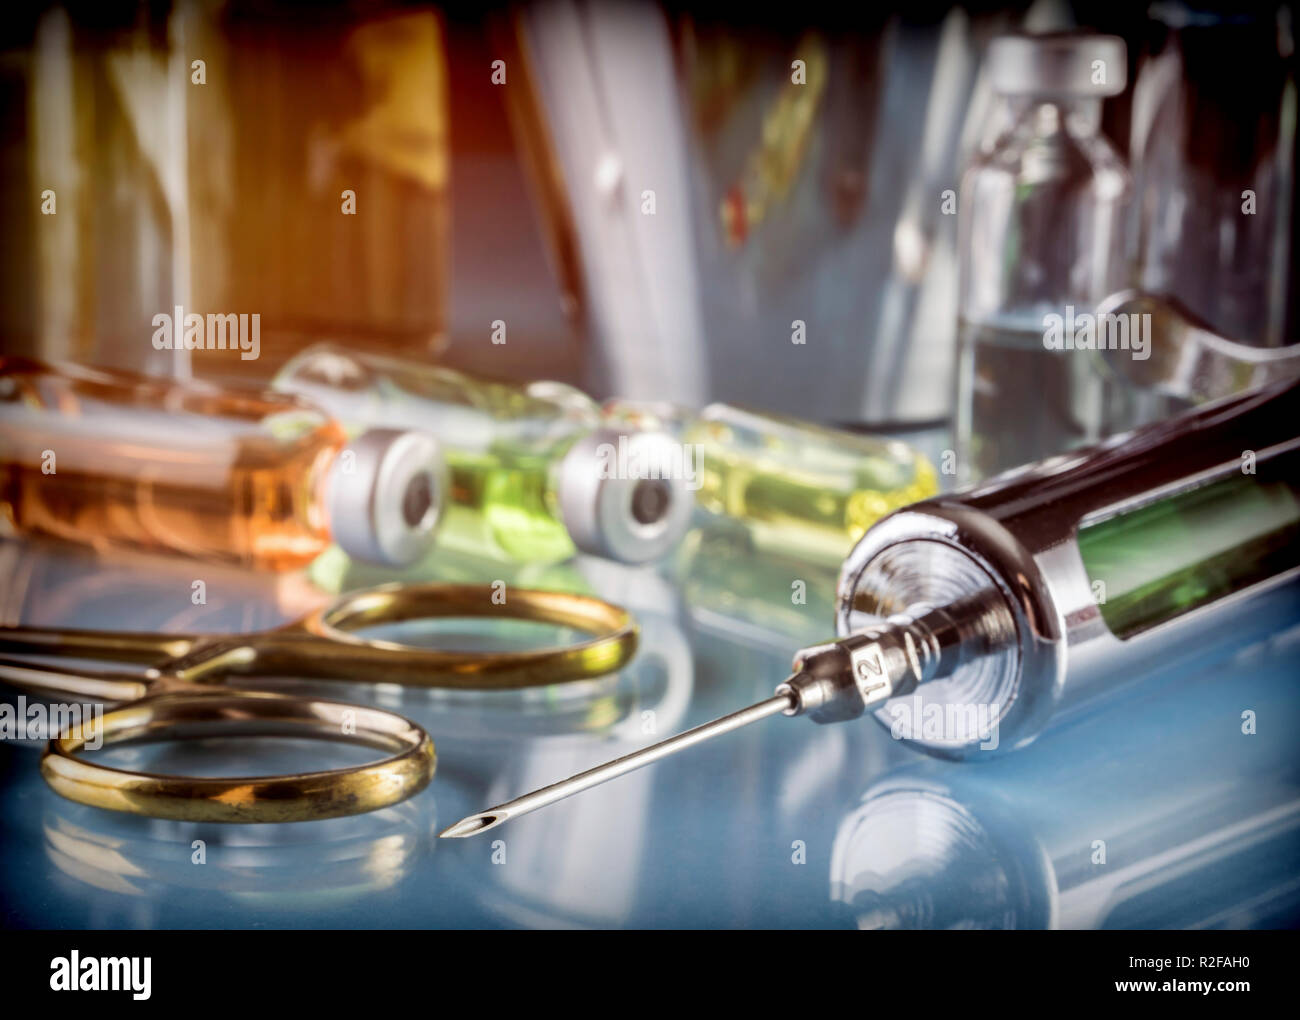 Different vials and utensils in an operating theater, conceptual image Stock Photo